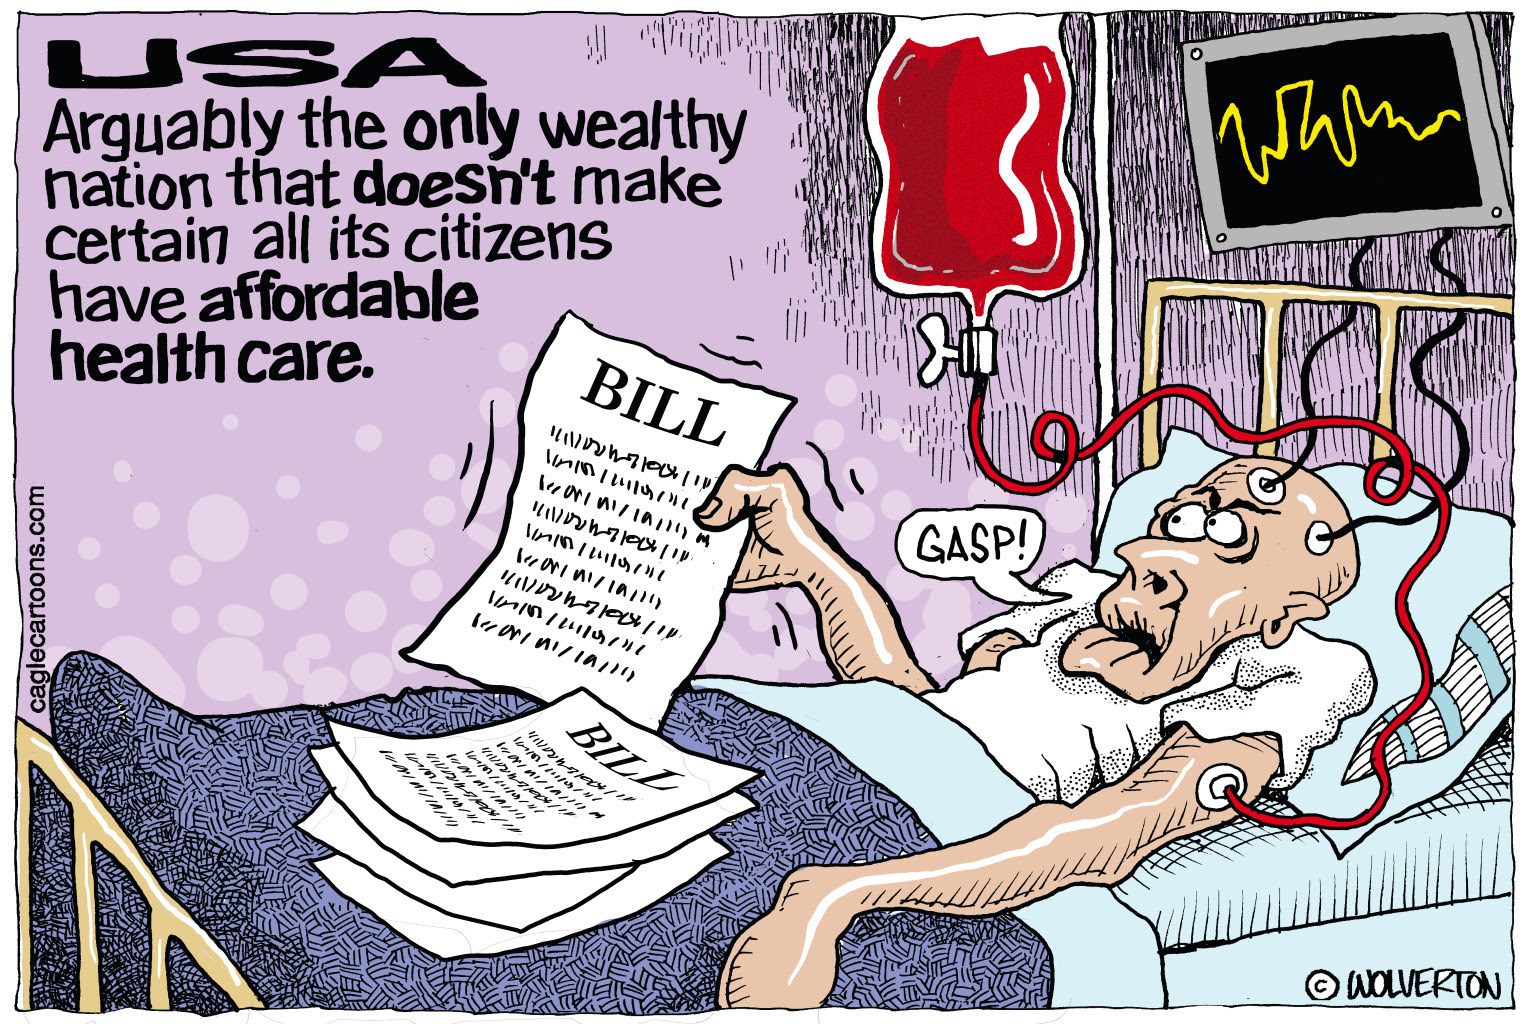 Republicans refuse healthcare benefits and try to kill the ACA healthcare benefit.